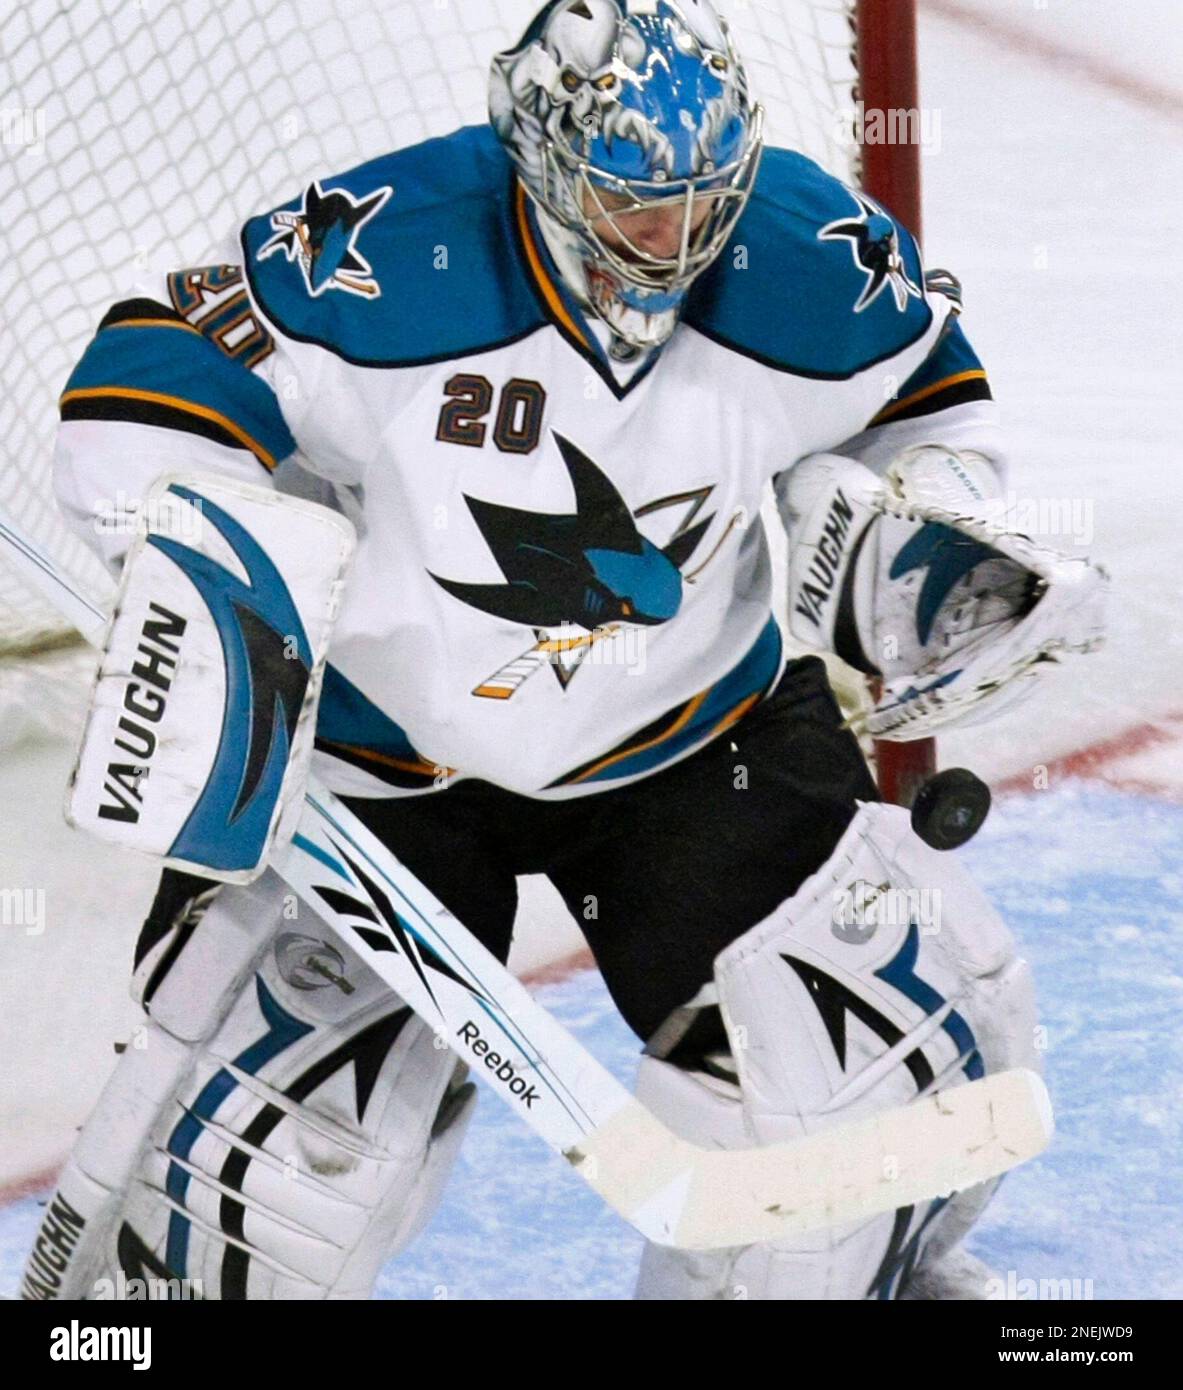 San Jose Sharks acquire Evgeni Nabokov, who's expected to retire